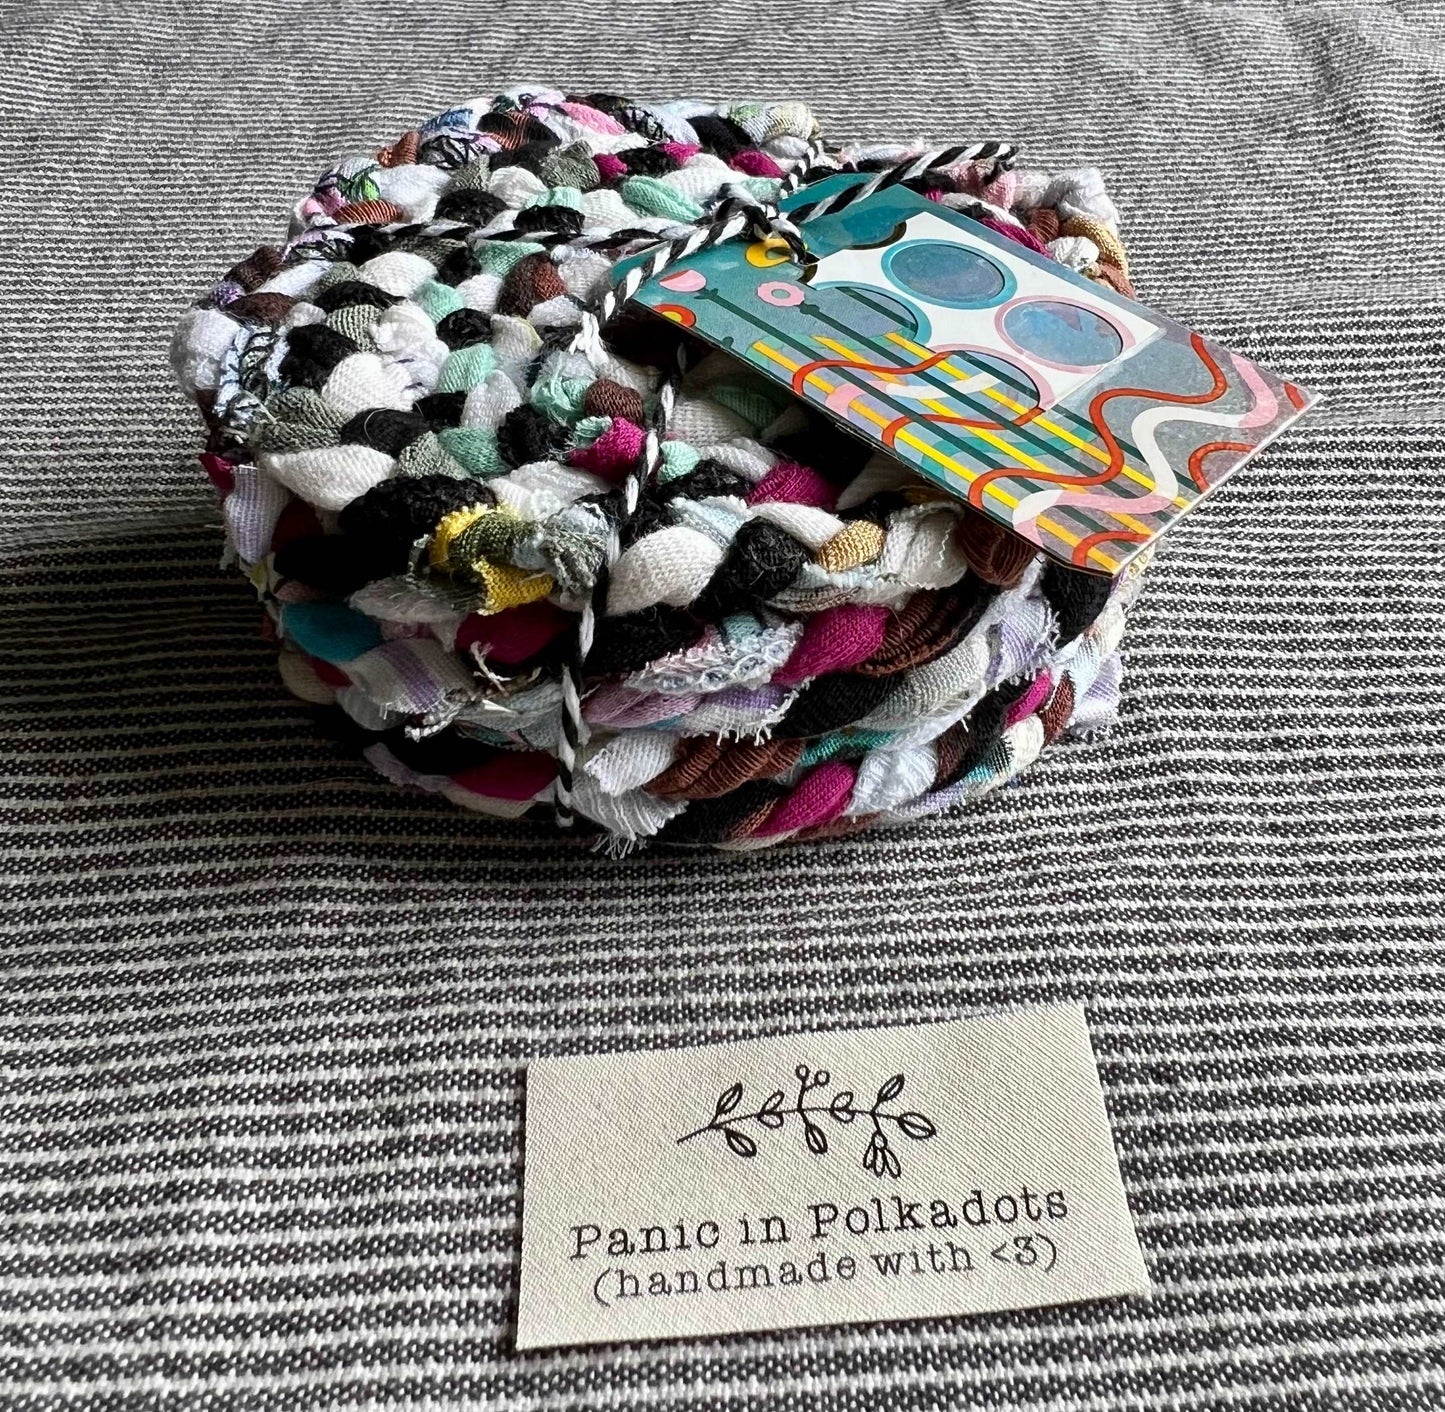 A set of six coasters, bound by string in a stack, with a Panic in Polkadots label in front